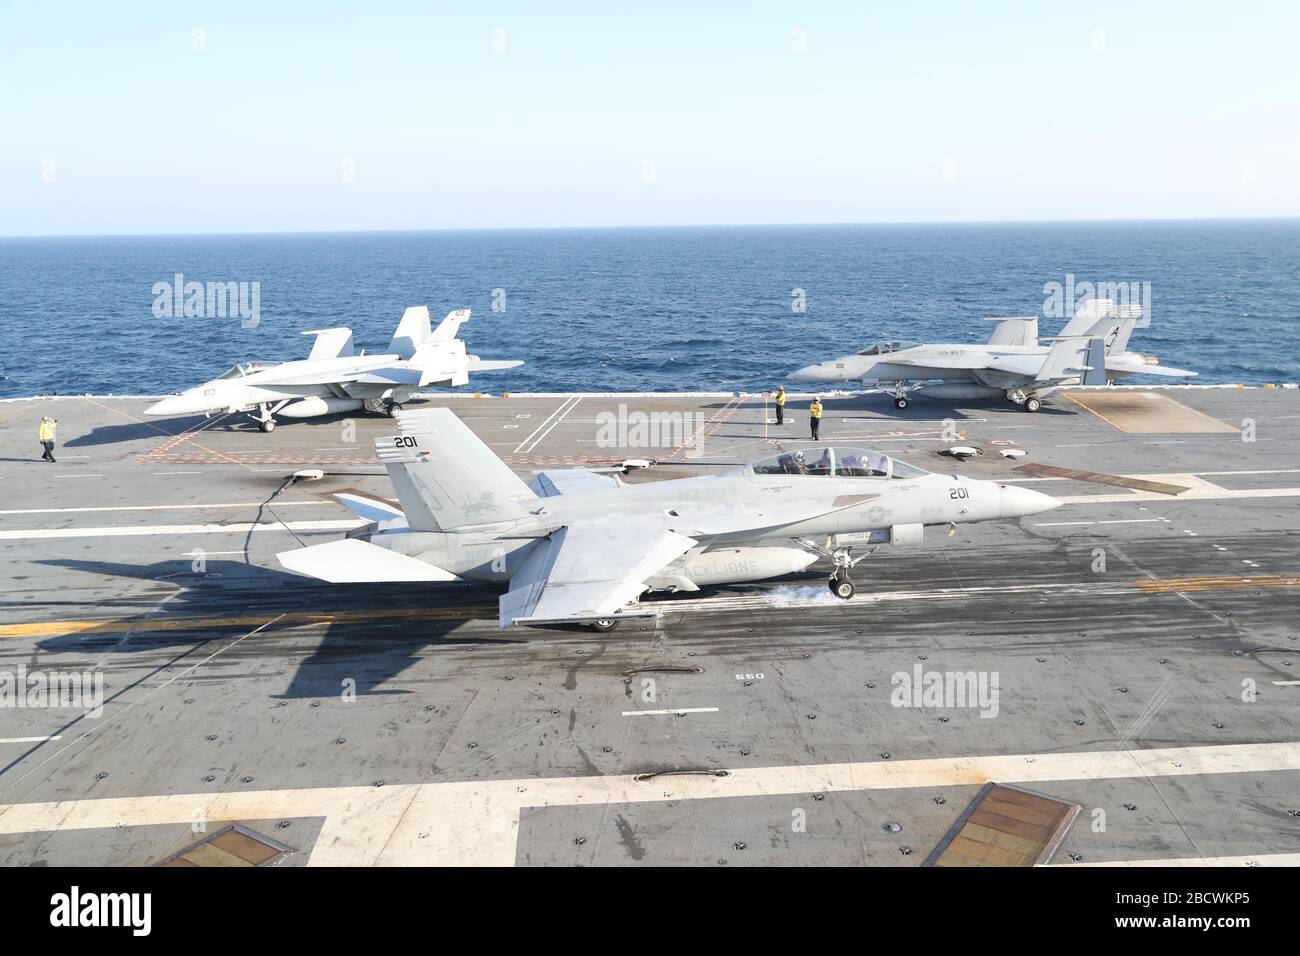 A U.S. Navy F/A-18E Hornet fighter aircraft attached to the Blacklions of Strike Fighter Squadron 213, lands on the flight deck of the Ford-class aircraft carrier USS Gerald R. Ford underway conducting its flight deck and combat air traffic control center certification March 19, 2020 in the Atlantic Ocean. Stock Photo